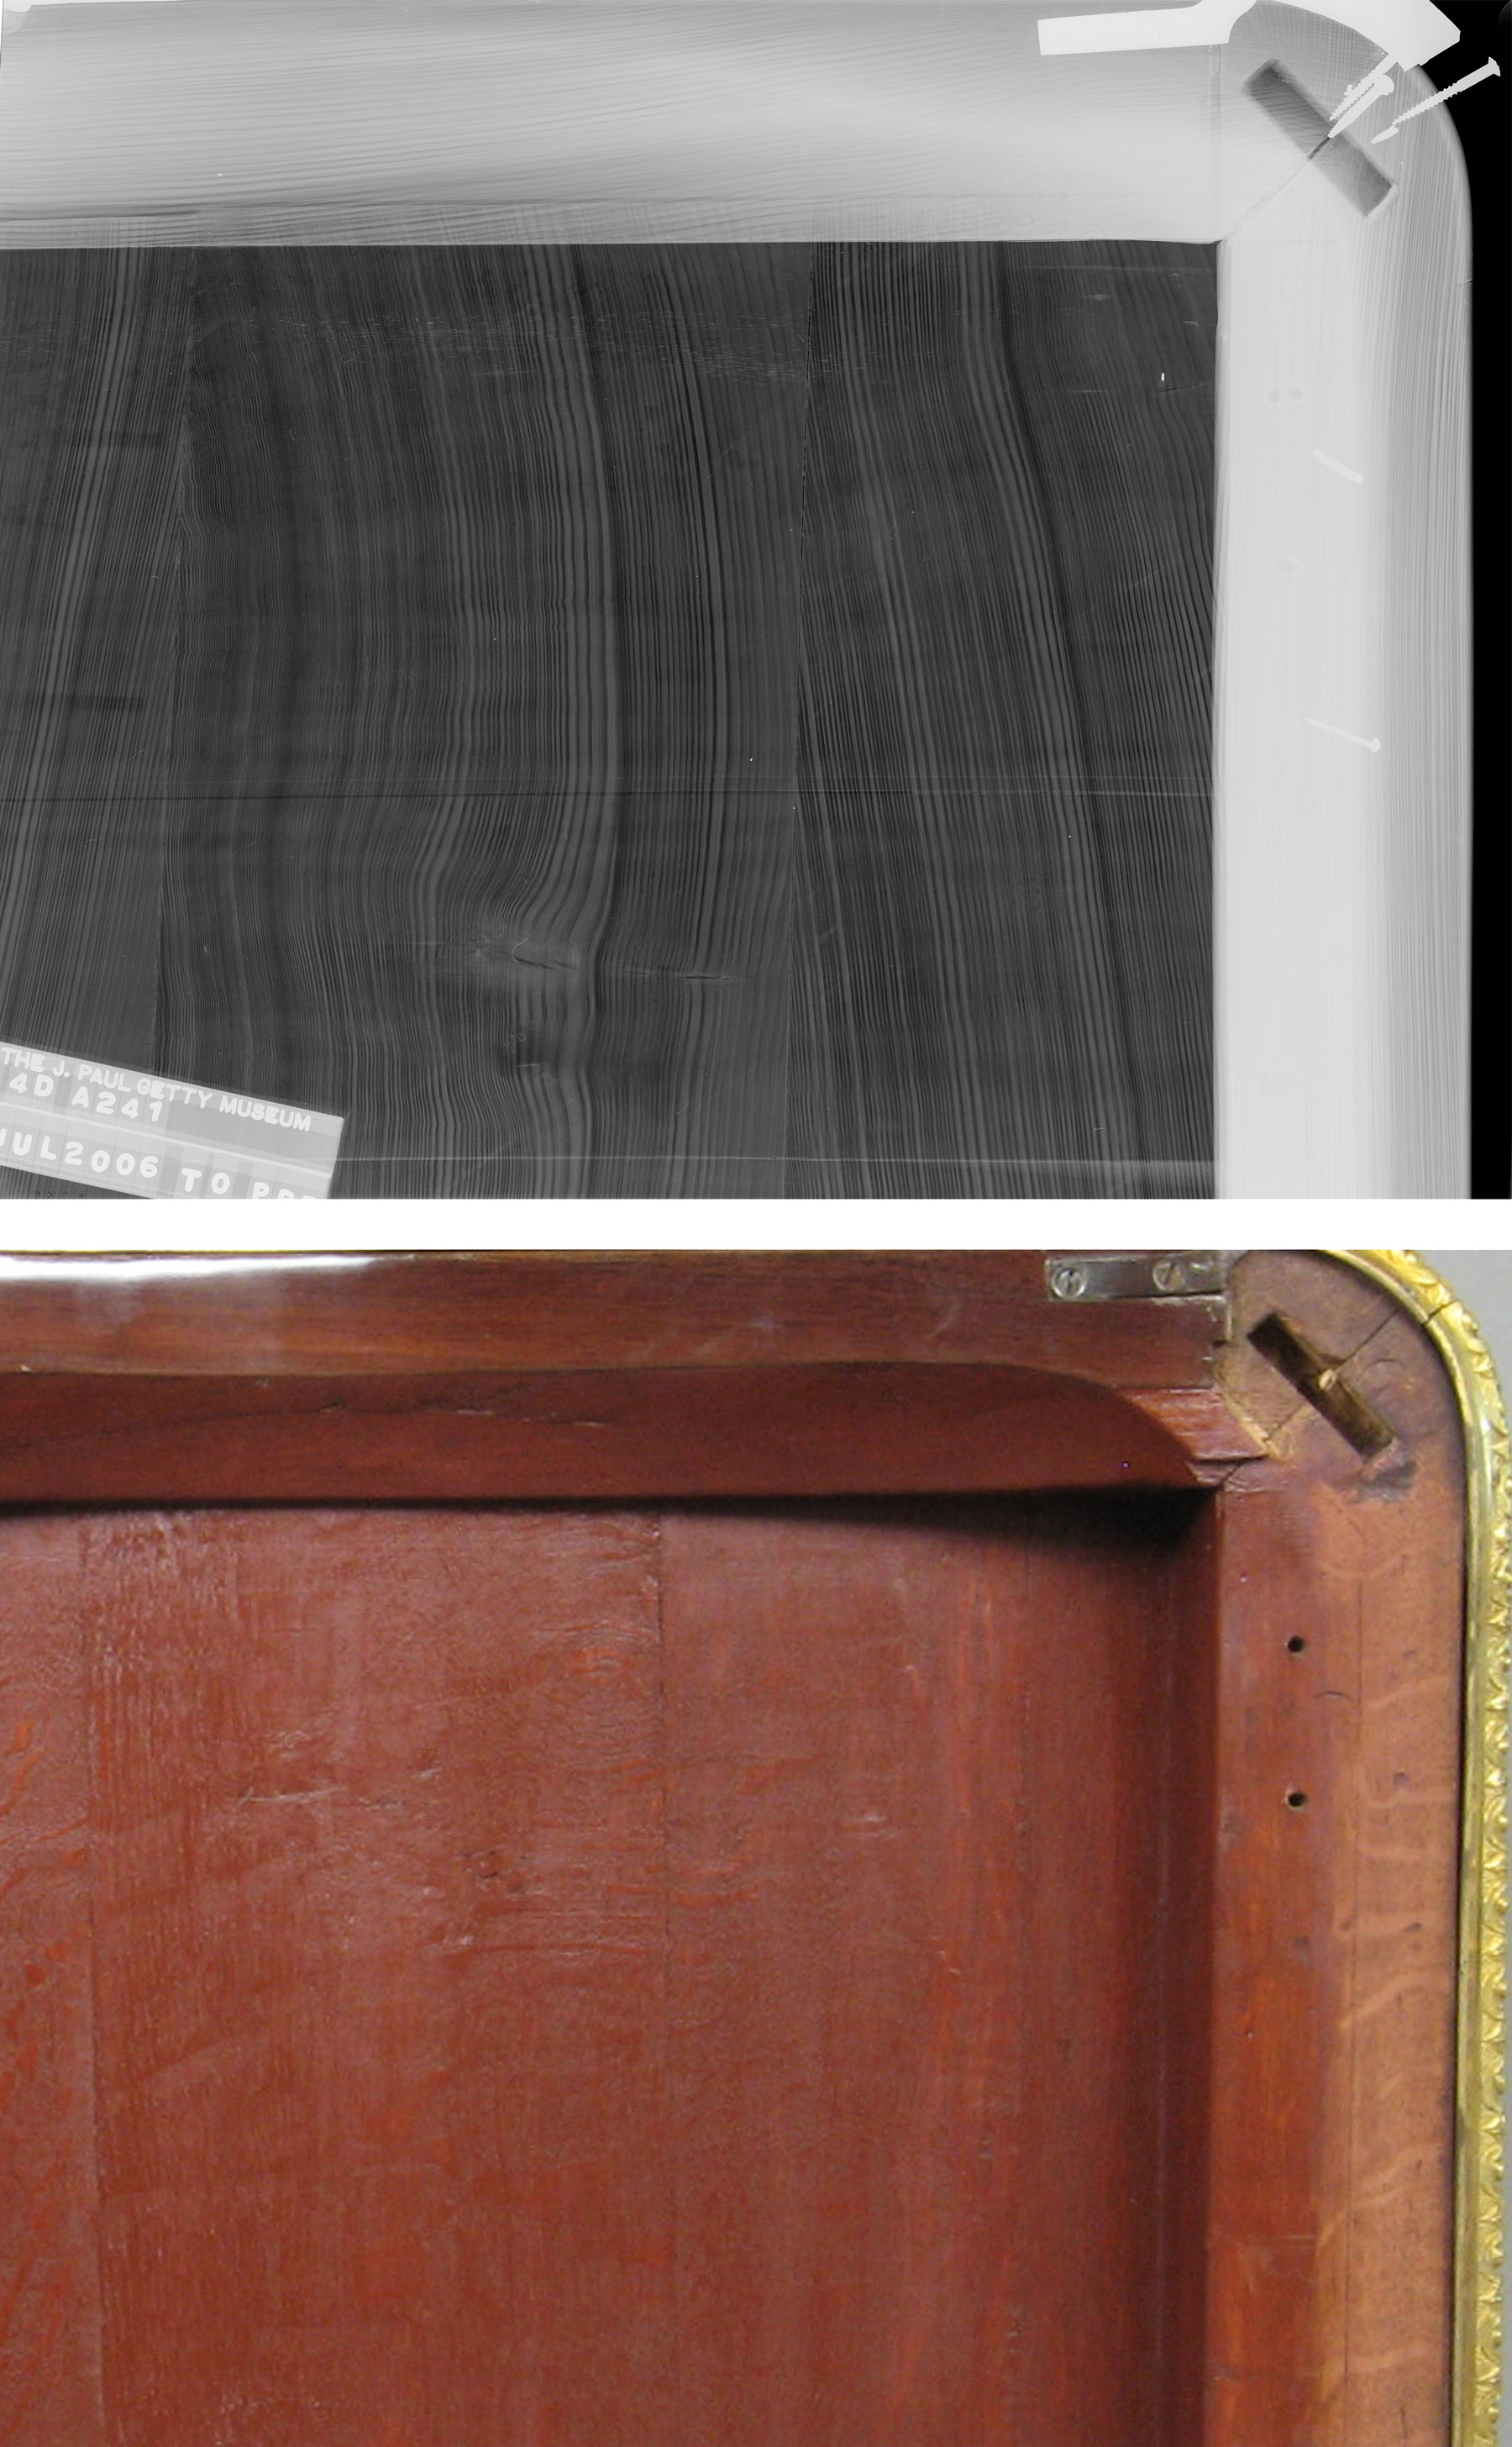 a black and white x-ray of the top of one of the cabinets revealing the hidden board between the two layers of the cabinet, coupled with a photograph of the same section as seen from the above